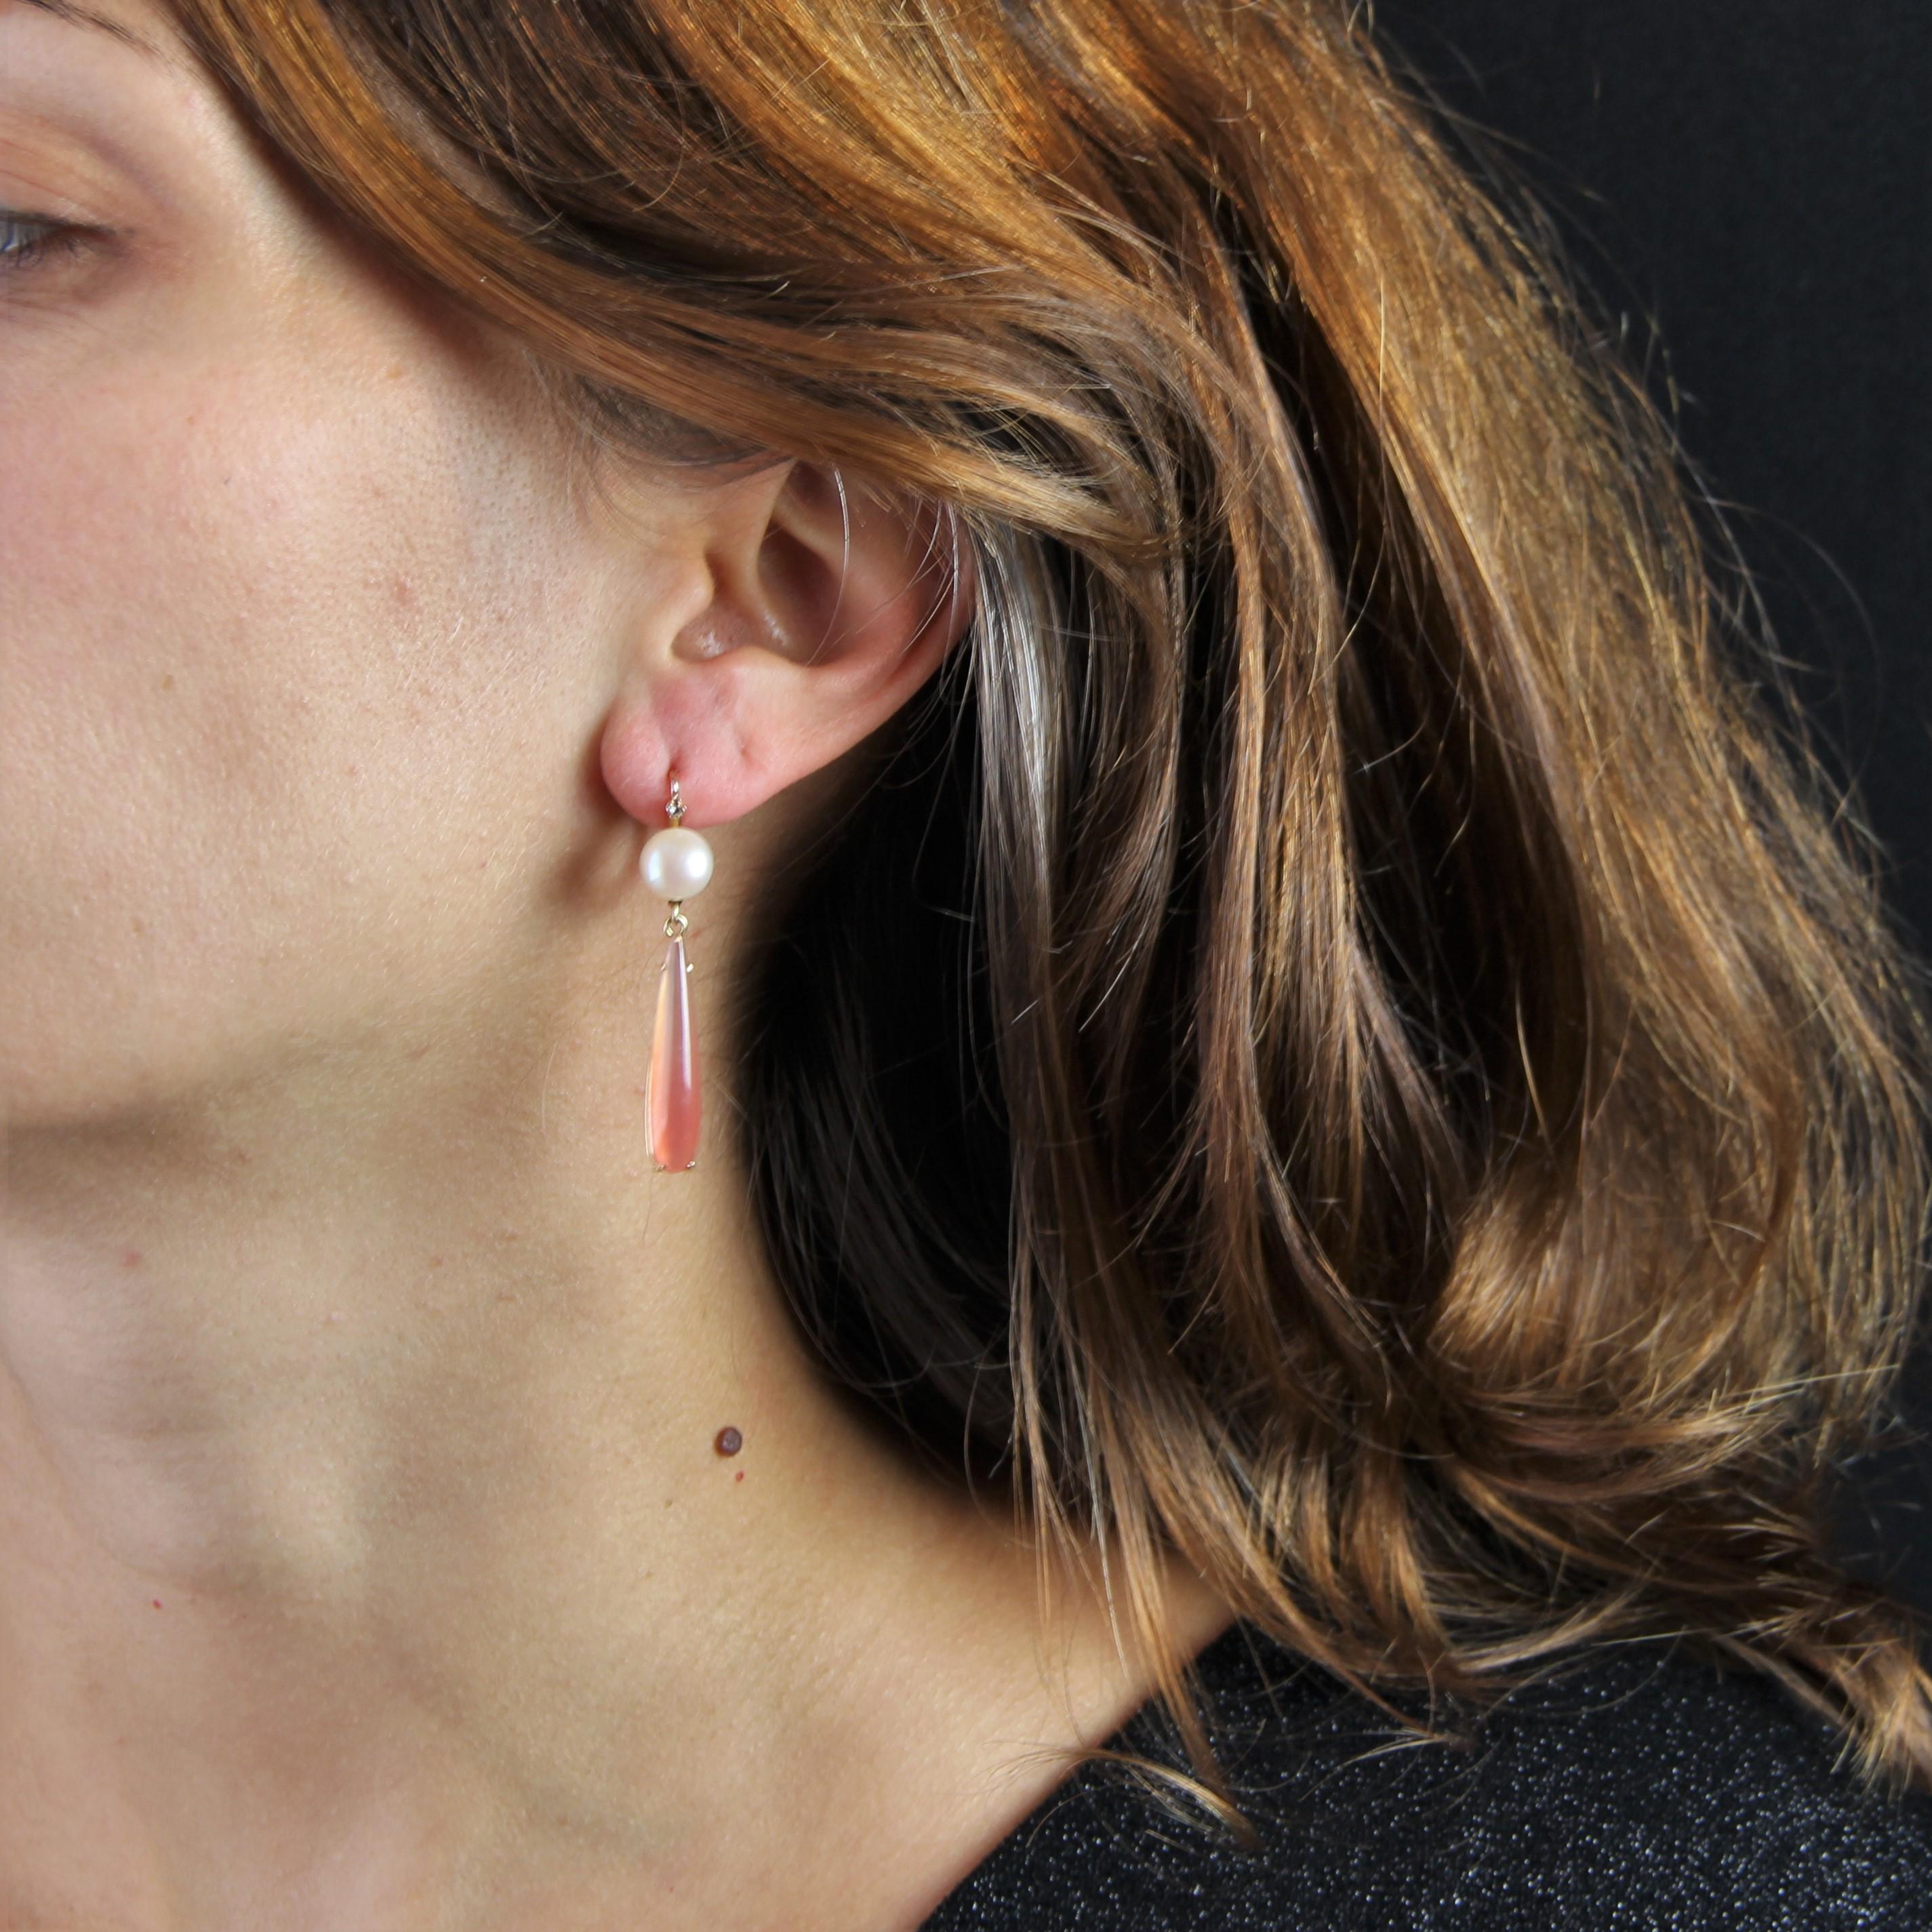 For pierced ears.
Dangle earrings in 18 karat rose gold, eagle head hallmark.
Elegant and slender, each earring is adorned with a small rose-cut diamond, a pearly white cultured pearl, all supporting a long drop of hydrogrossular garnet. The